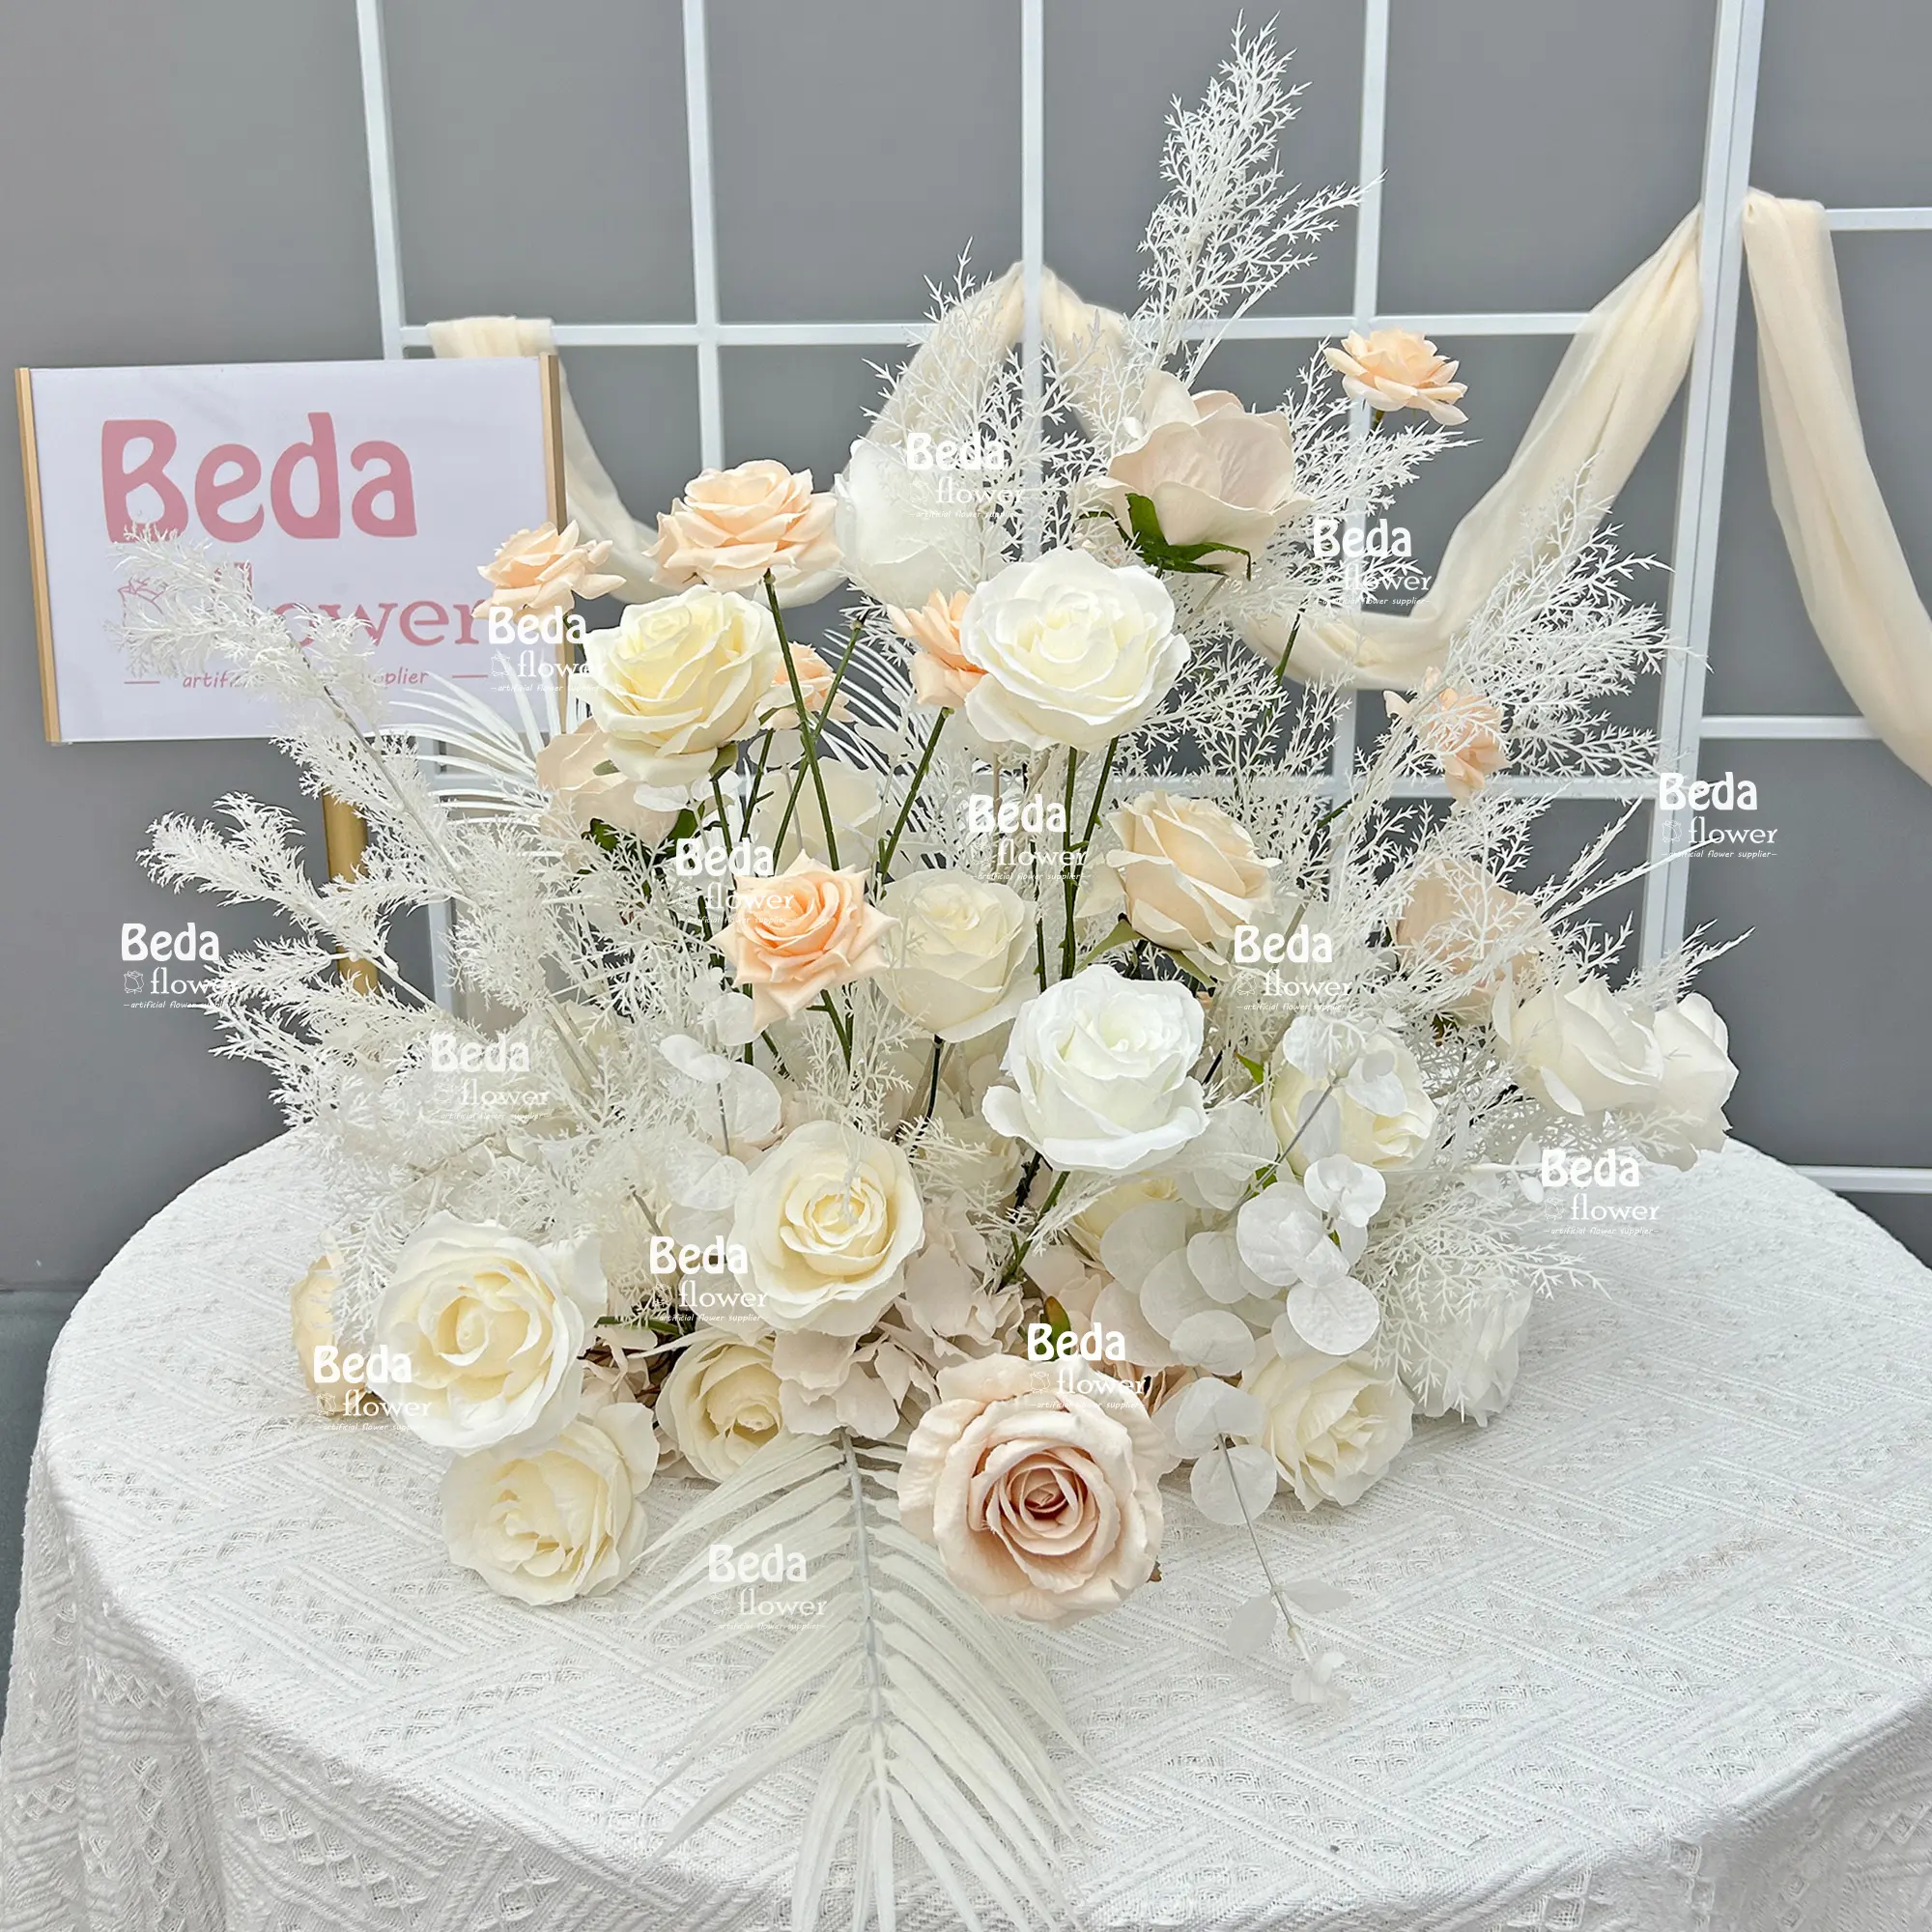 2024 Beda New Product Flower Garland Centerpieces for Wedding Decoration   Reception table decoration or other events decor